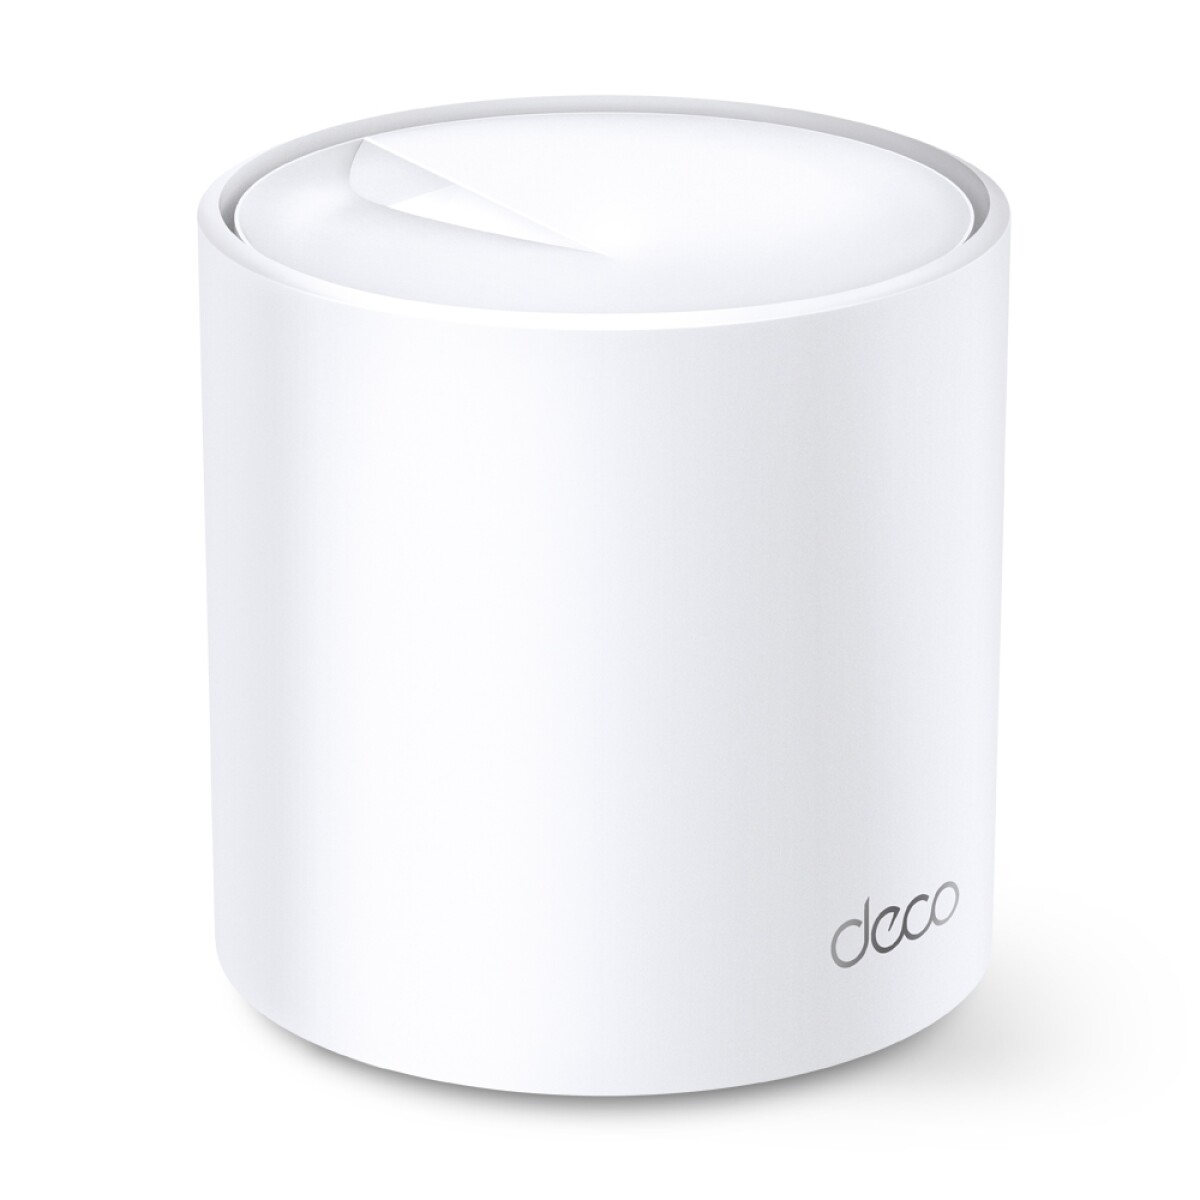 Access Point, Router, Sistema Wi-fi Mesh Tp-link Deco X20 Blanco 220v 